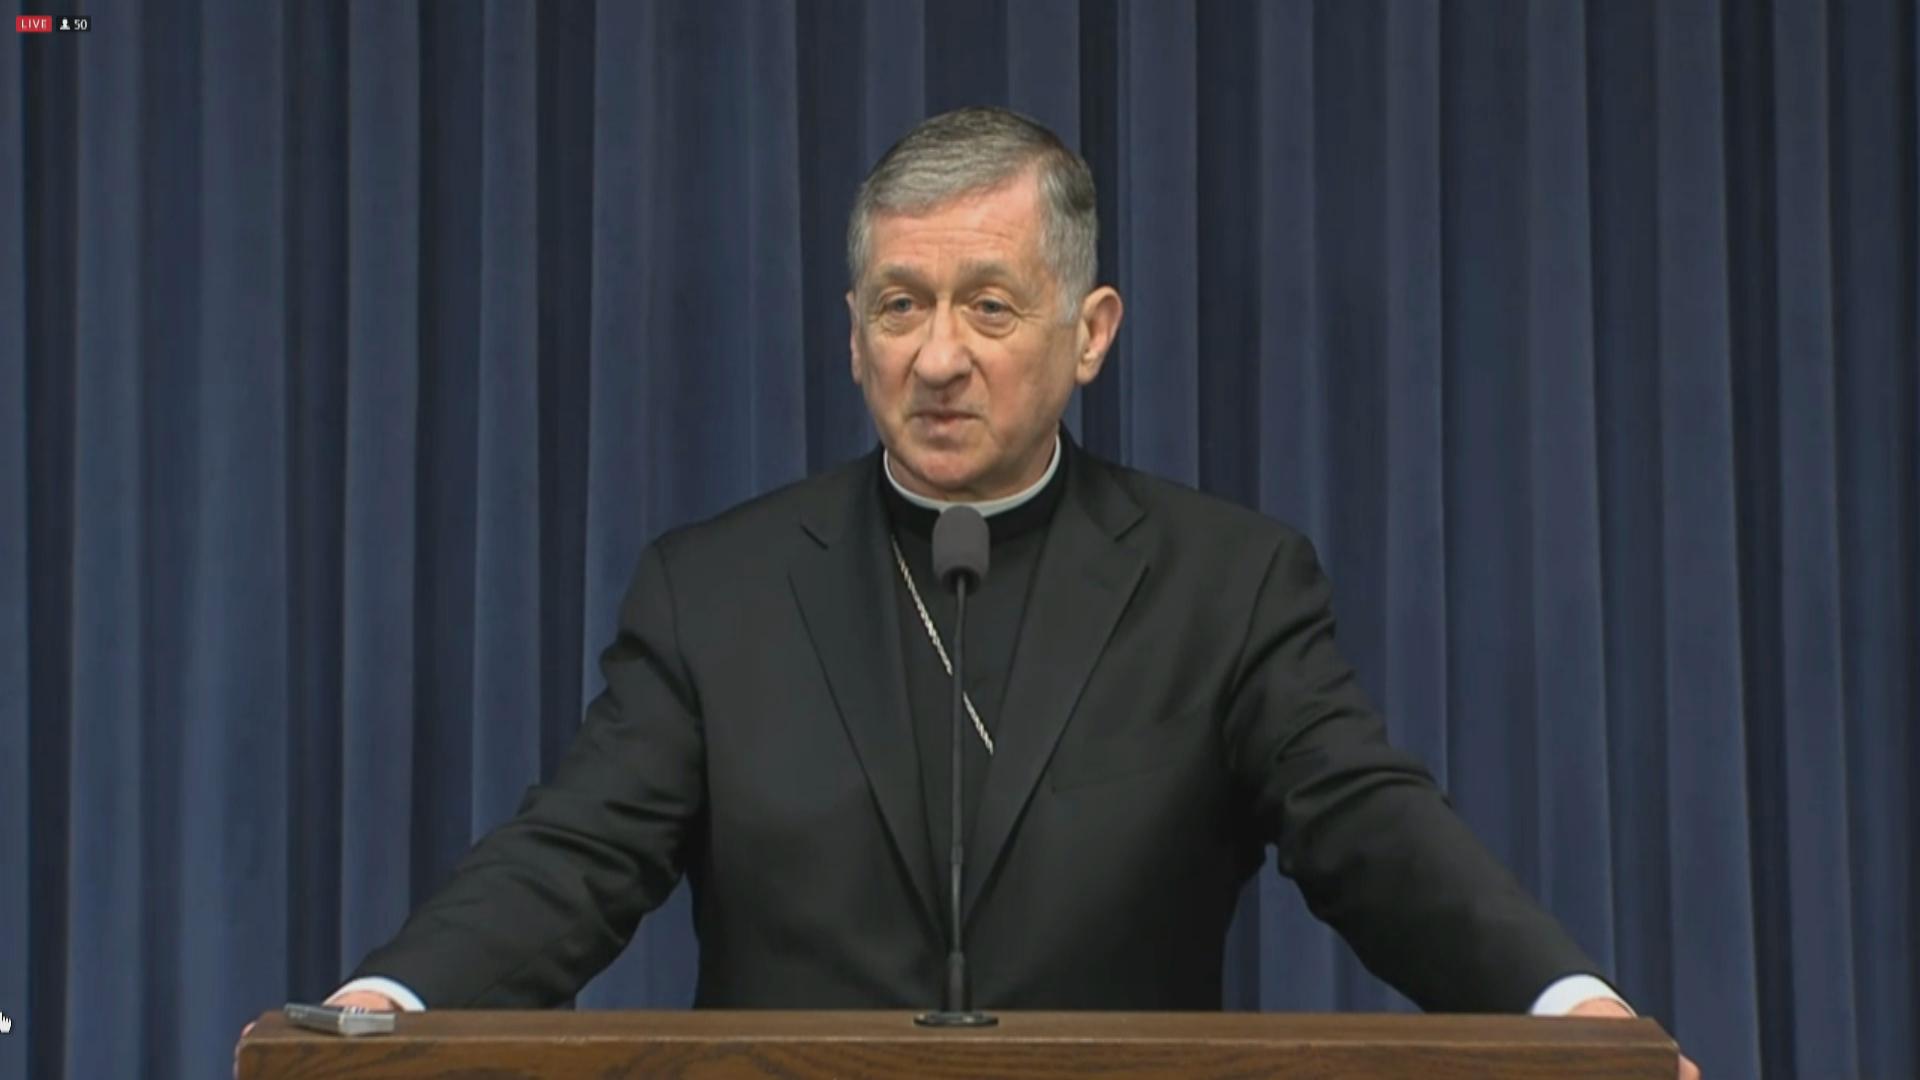 Cardinal Blase Cupich urges lawmakers Wednesday in Springfield to pass gun control laws.